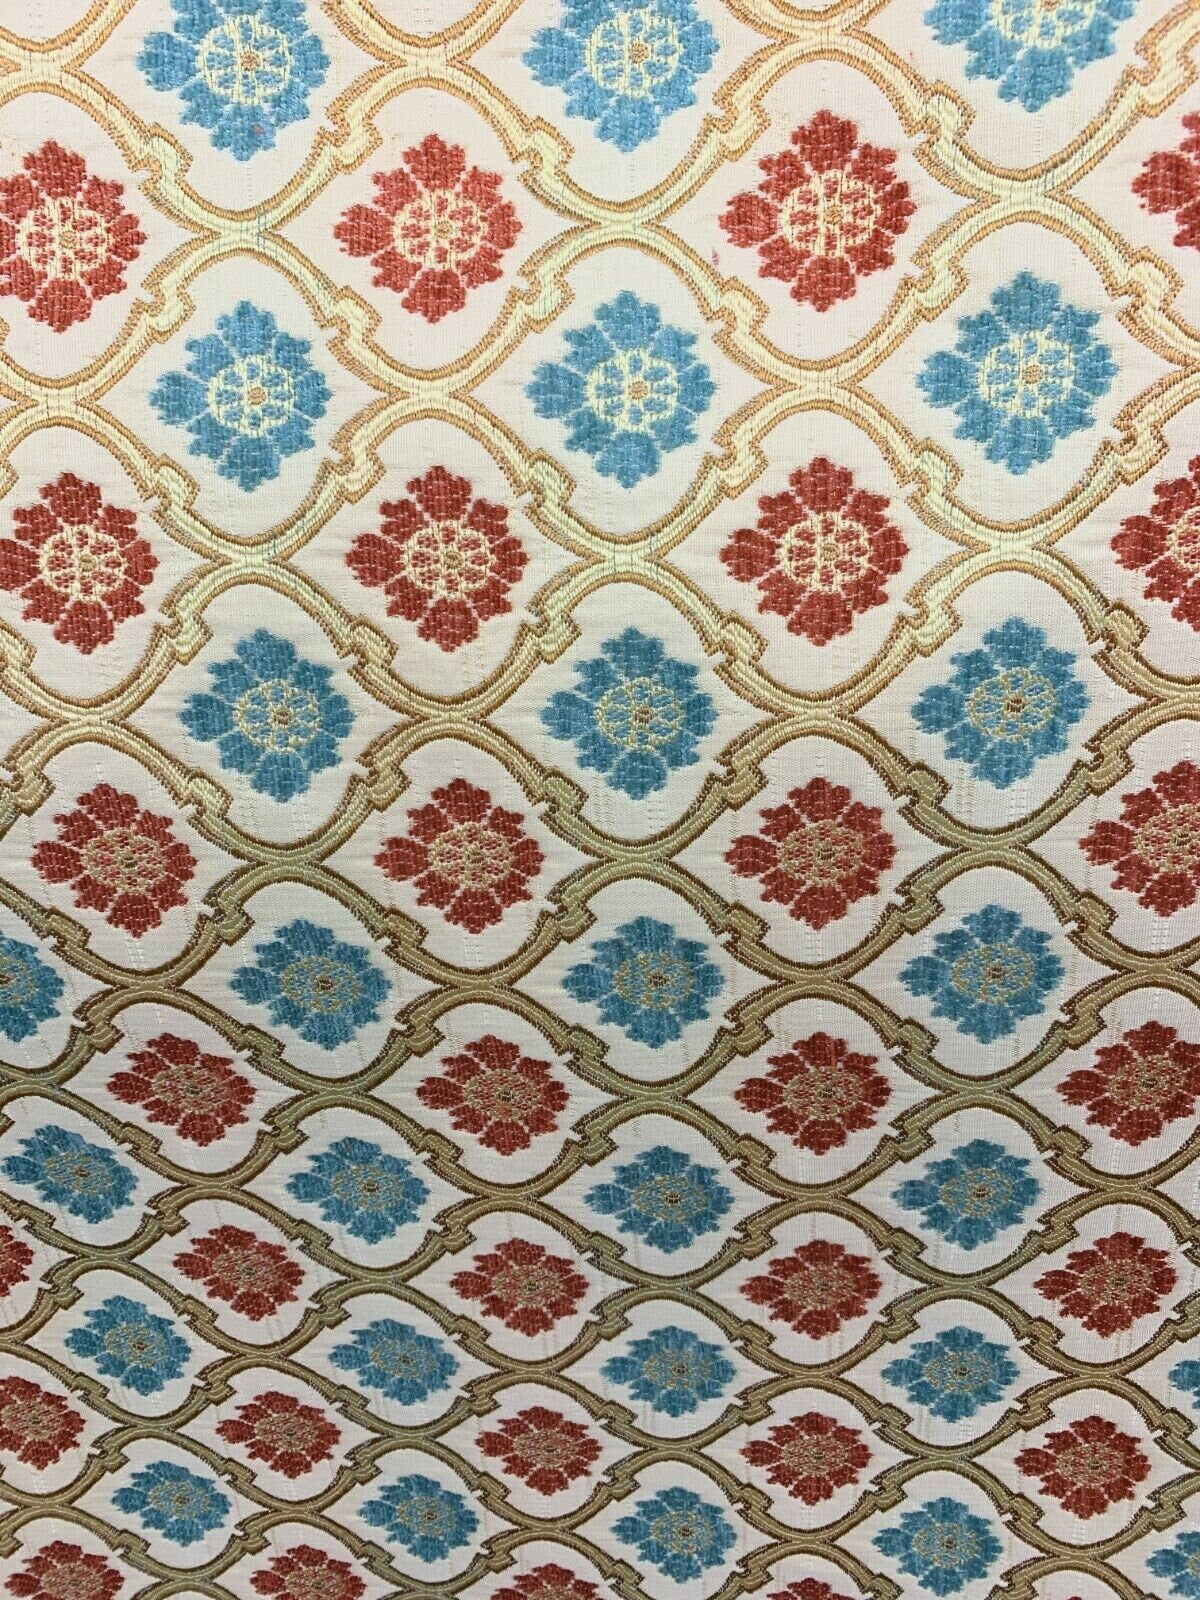 RED BLUE GOLD Floral Trellis Chenille Upholstery Brocade Fabric (56 in.) Sold By The Yard